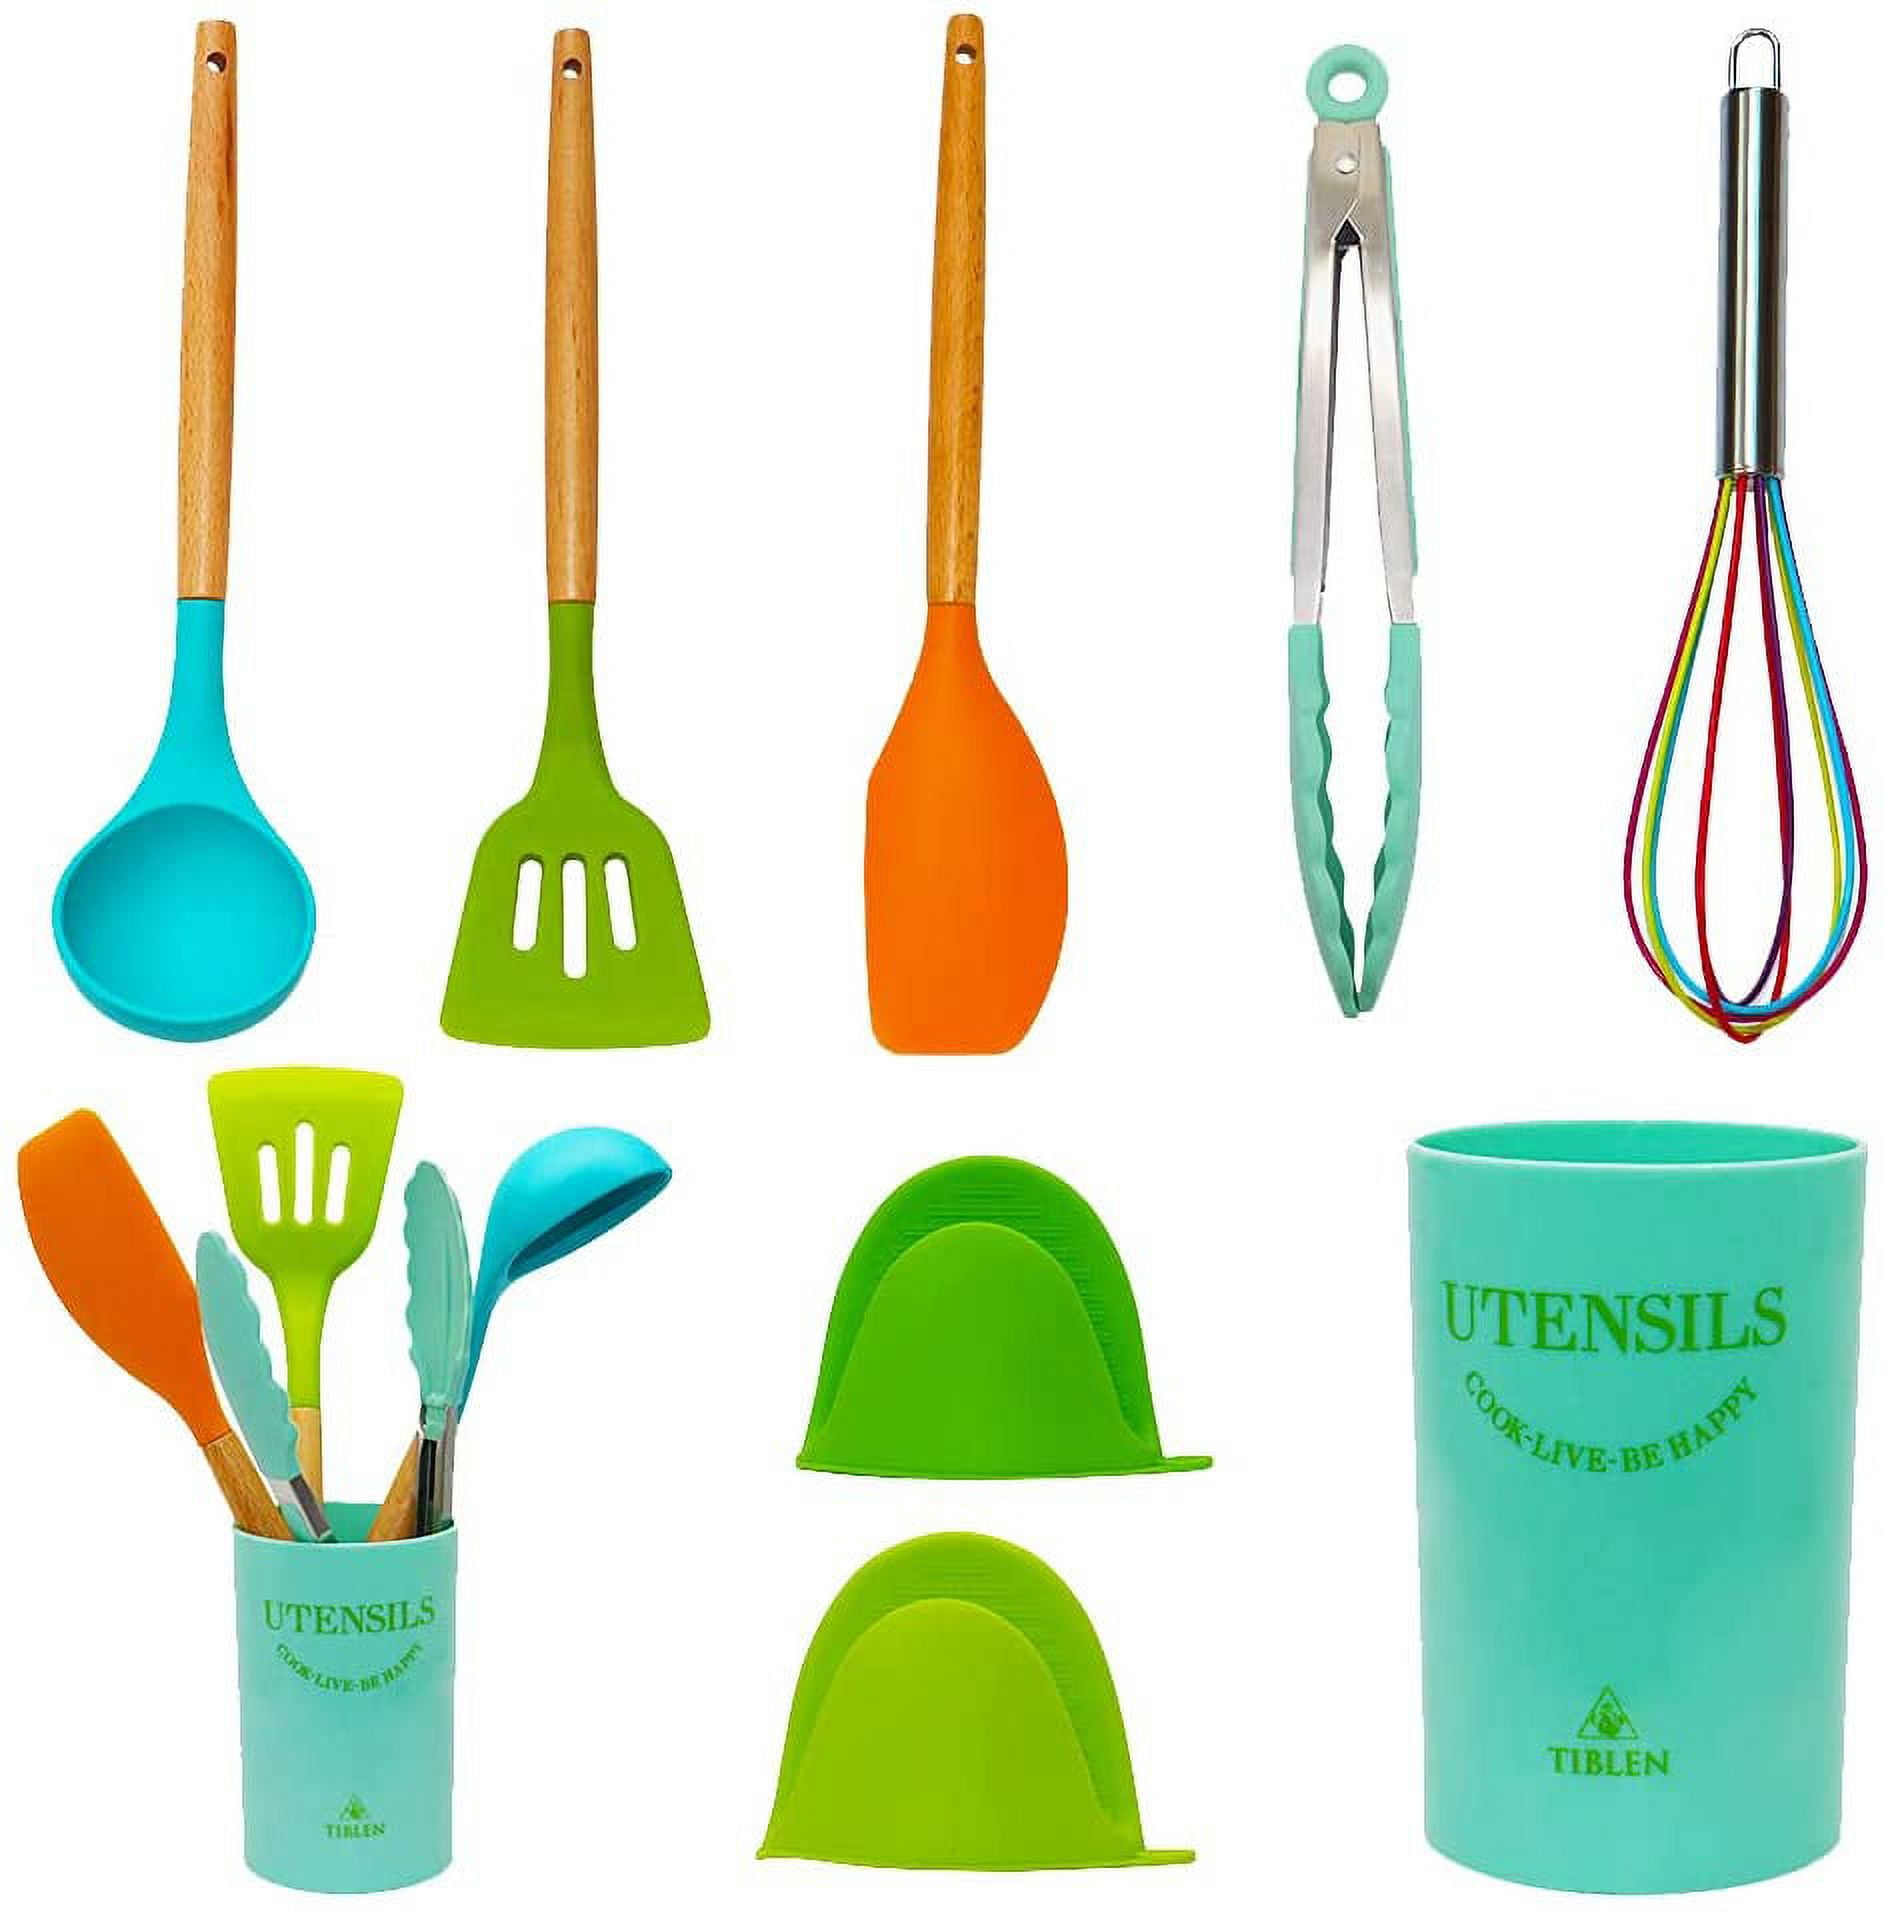 TIBLEN 18 Pcs Silicone Kitchen Cooking Utensil Set, Non-Stick Heat Resistant Cookware, BPA Free Non-Toxic Tools, Turner Tongs Ladle Spoon Whisk